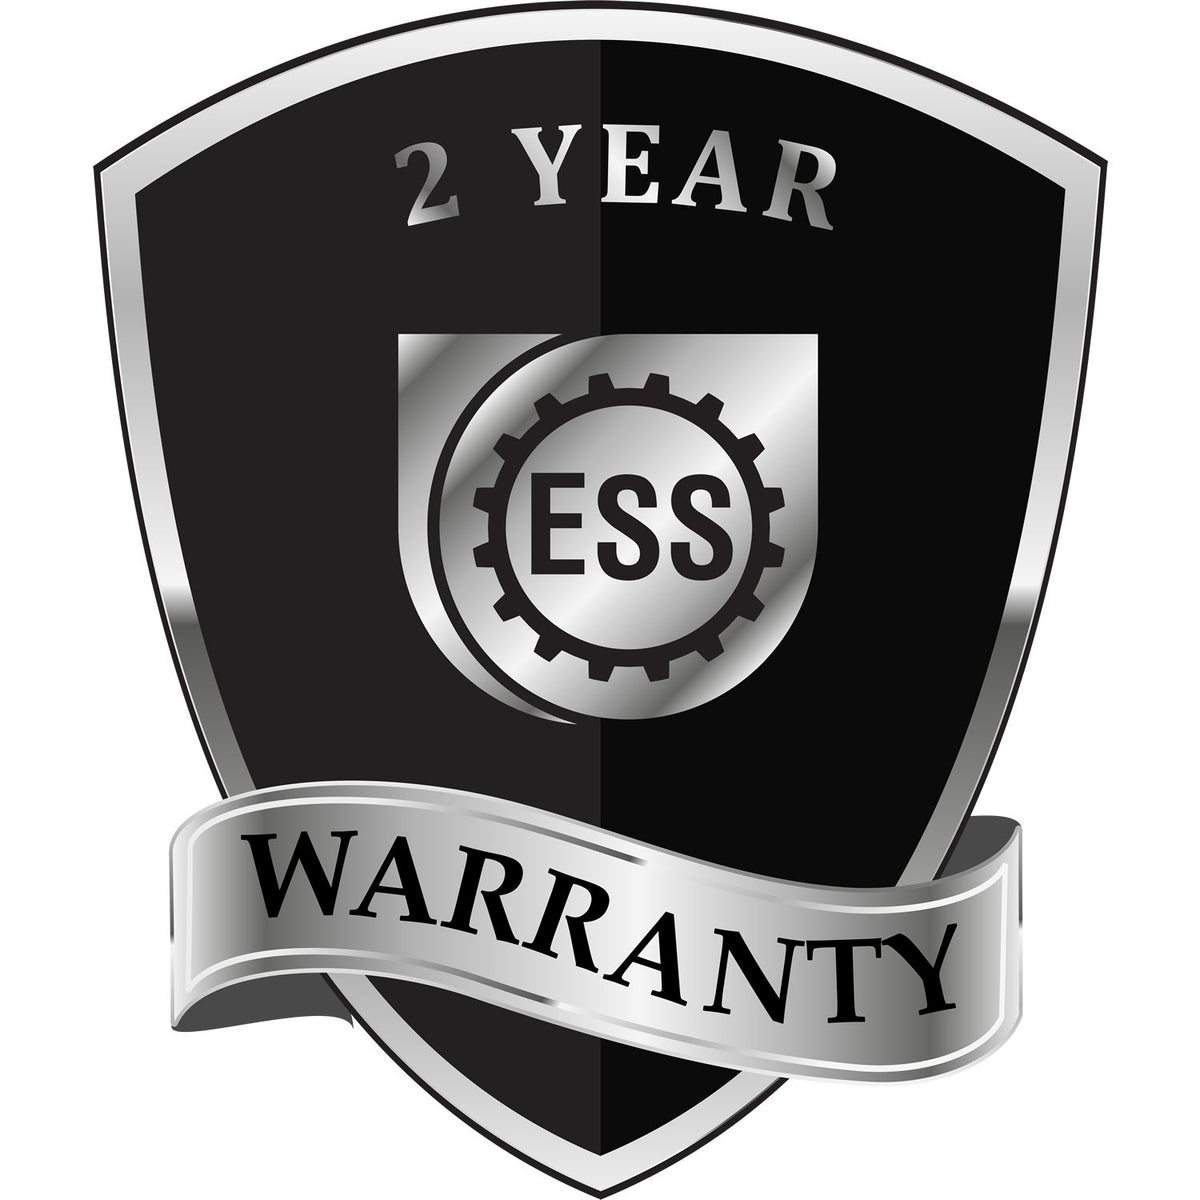 A badge or emblem showing a warranty icon for the Extended Long Reach Oklahoma Architect Seal Embosser